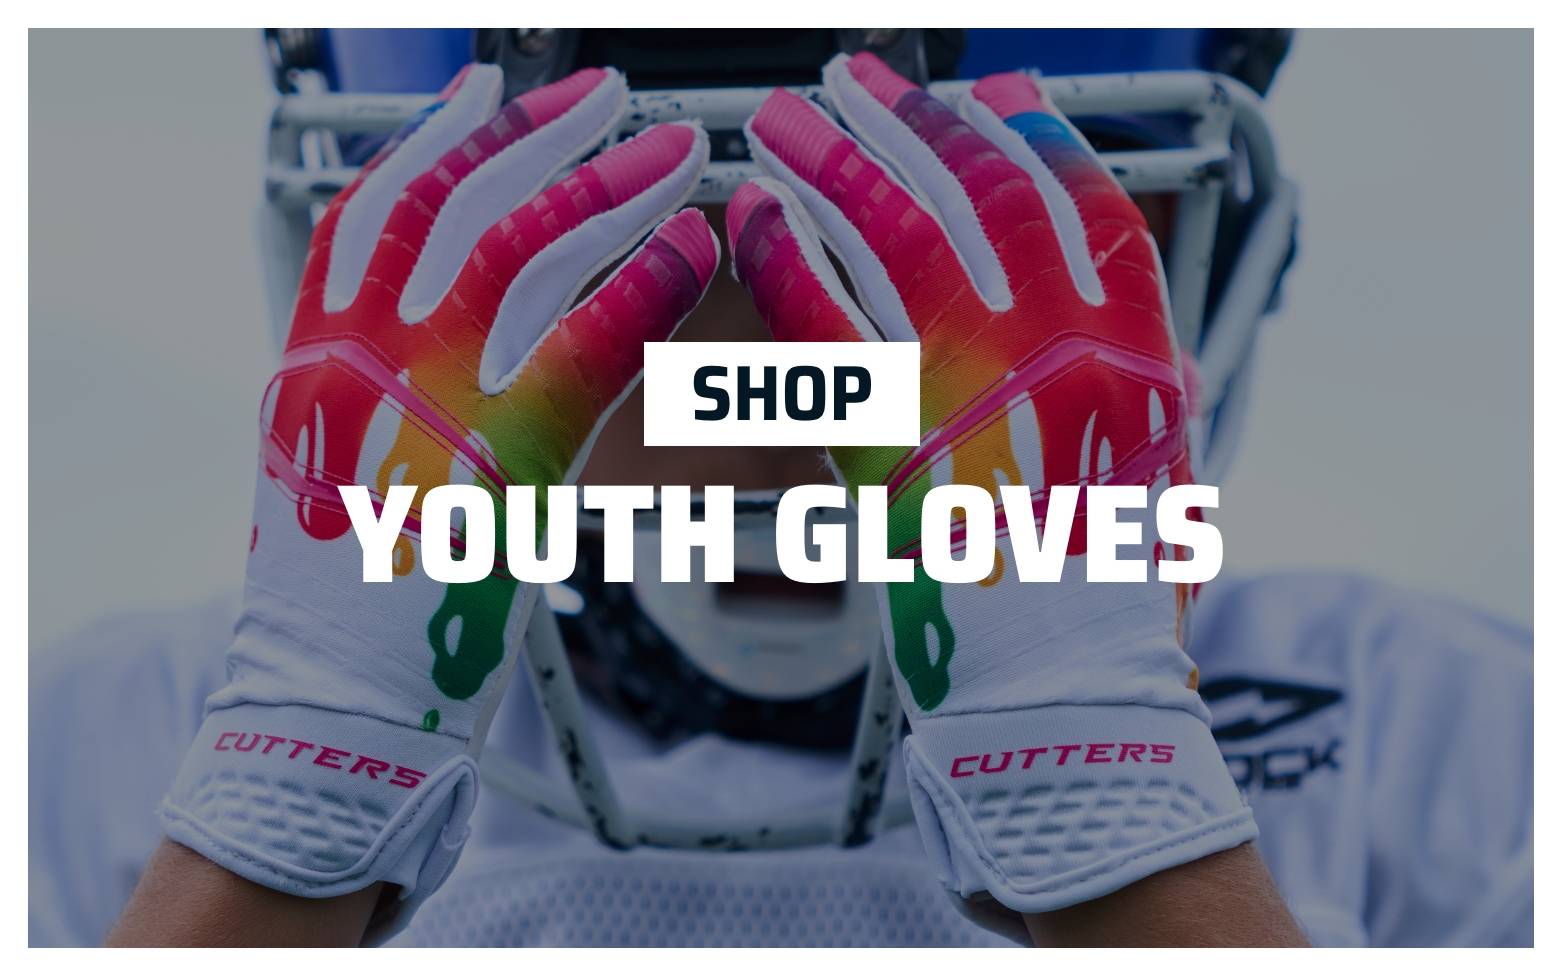 SHOP YOUTH GLOVES